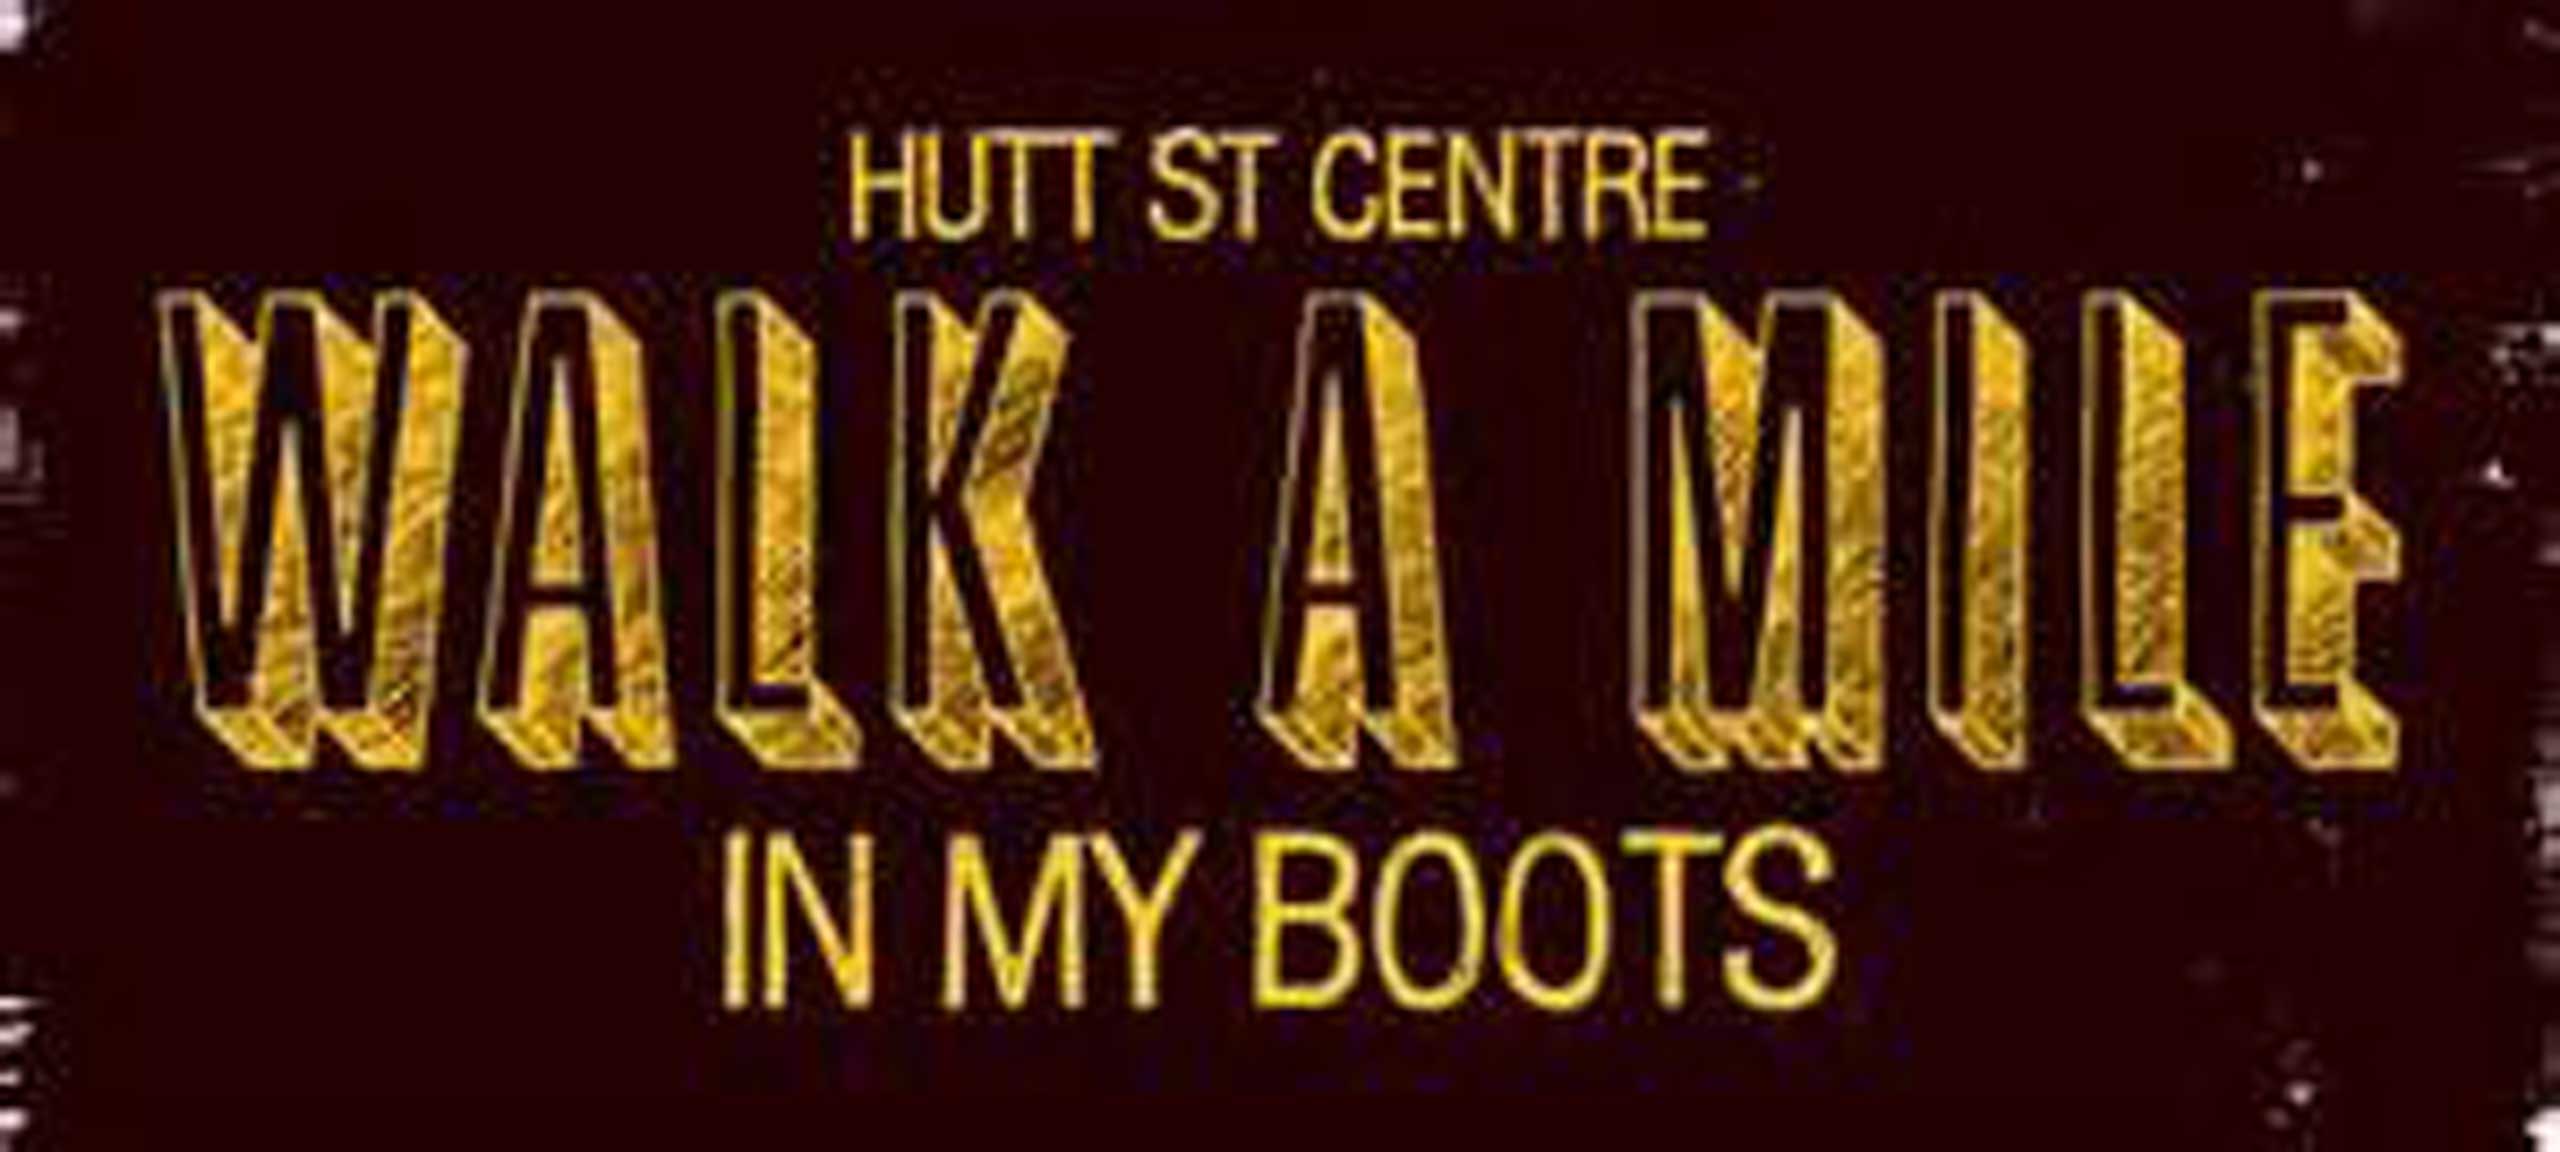 Walk a mile in my boots